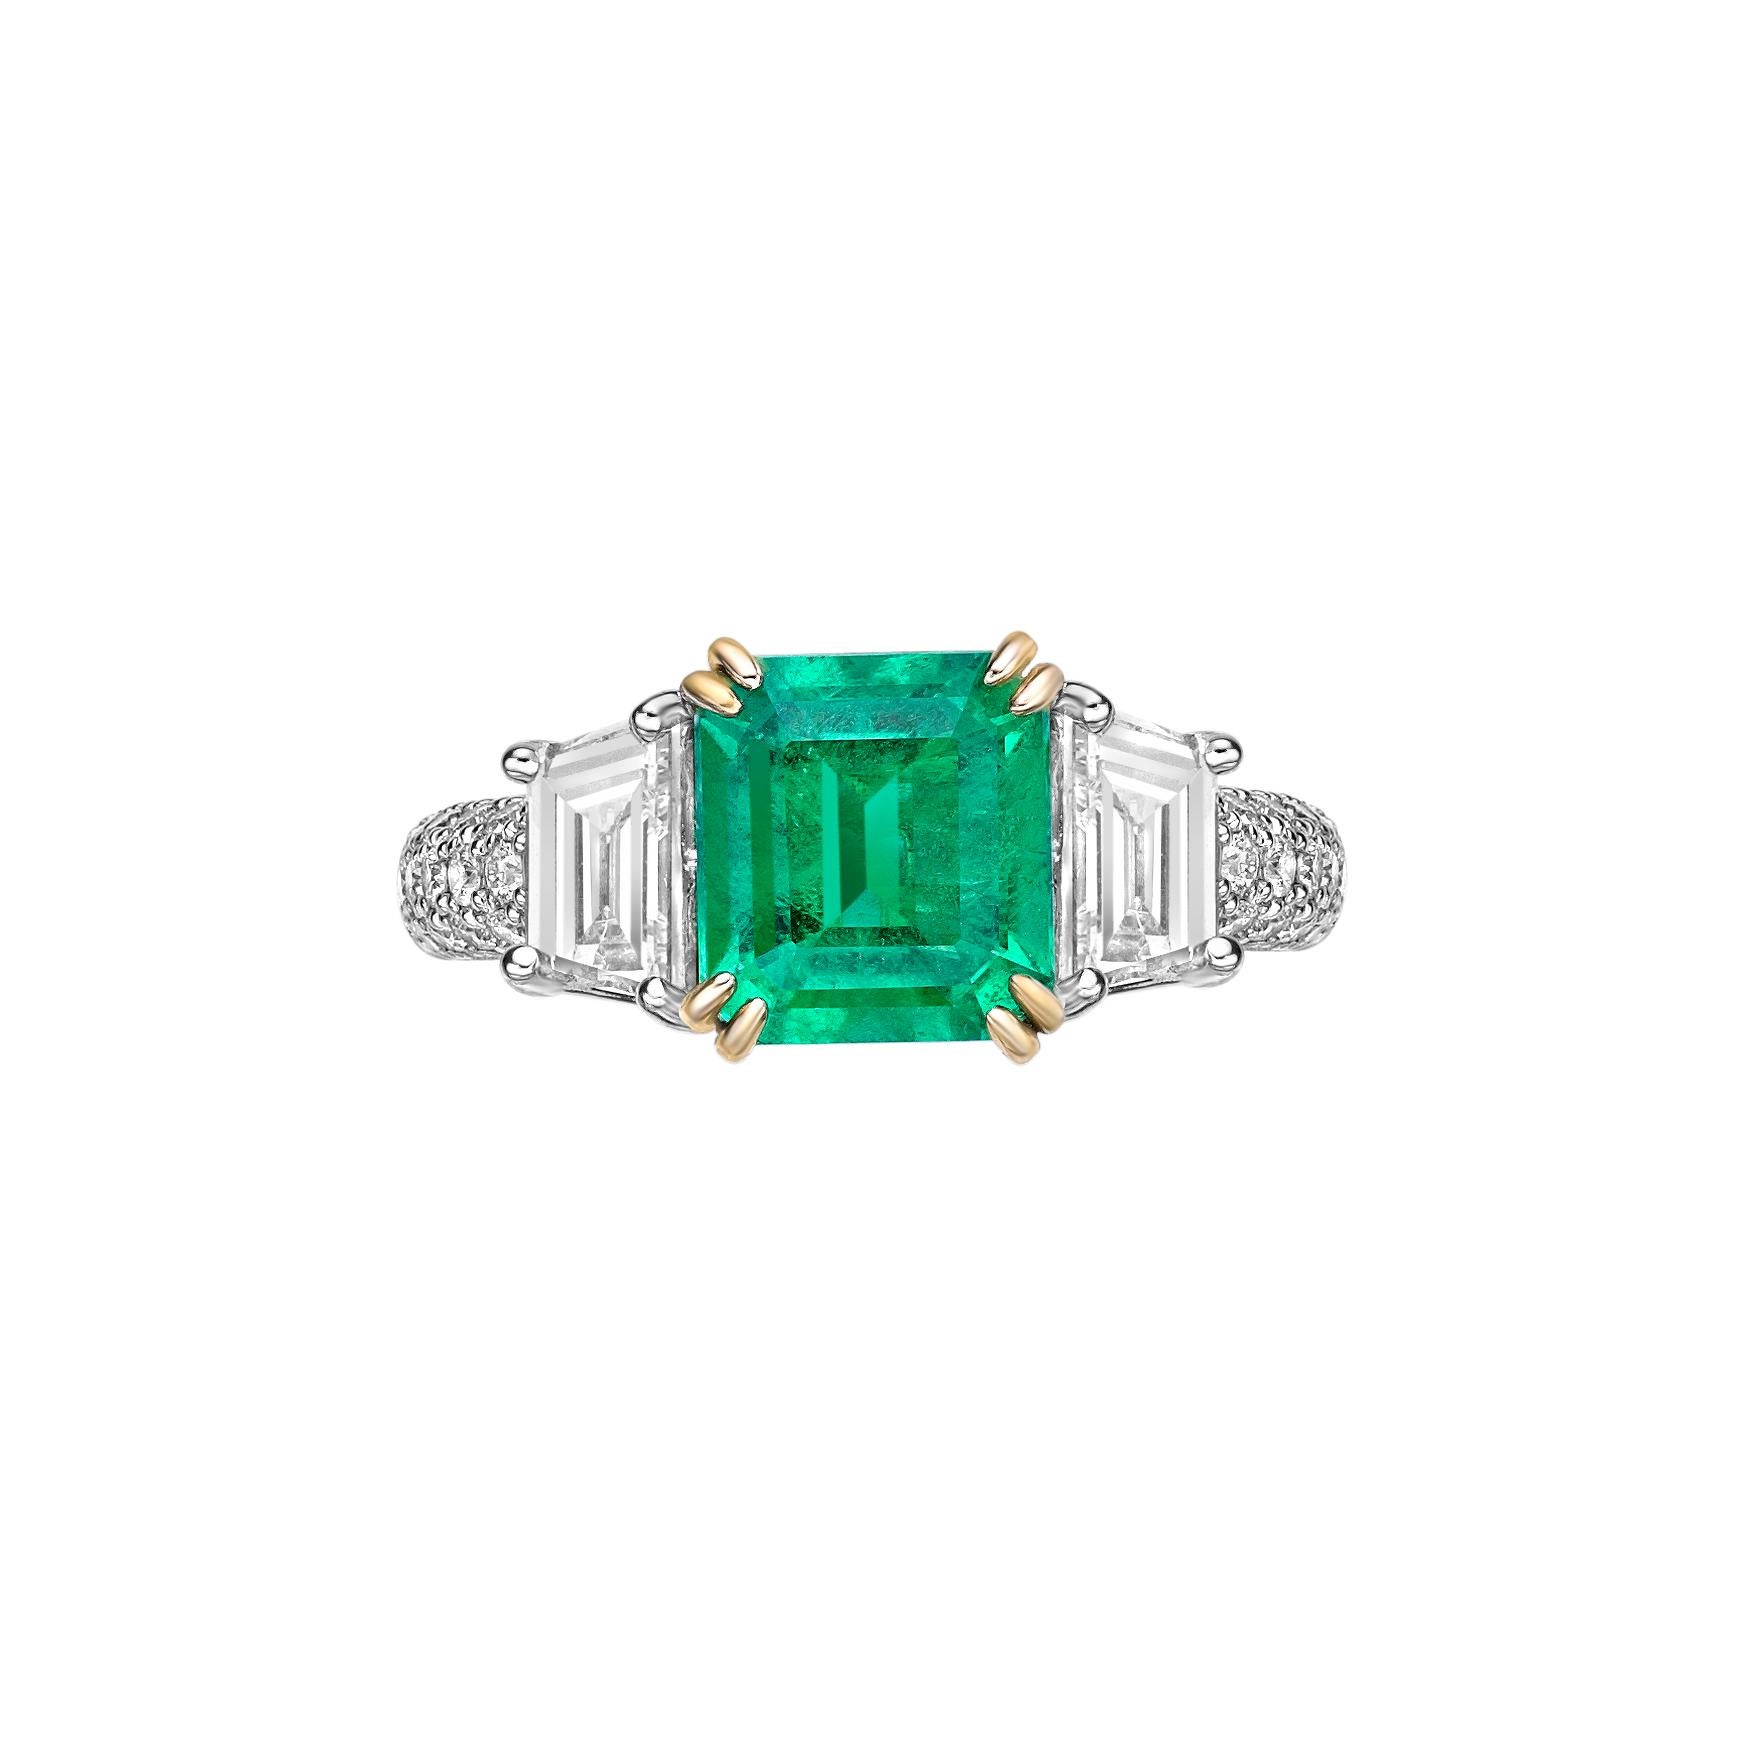 Contemporary 2.36 Carat Emerald Fancy Ring in 18Karat White Yellow Gold with White Diamond. For Sale